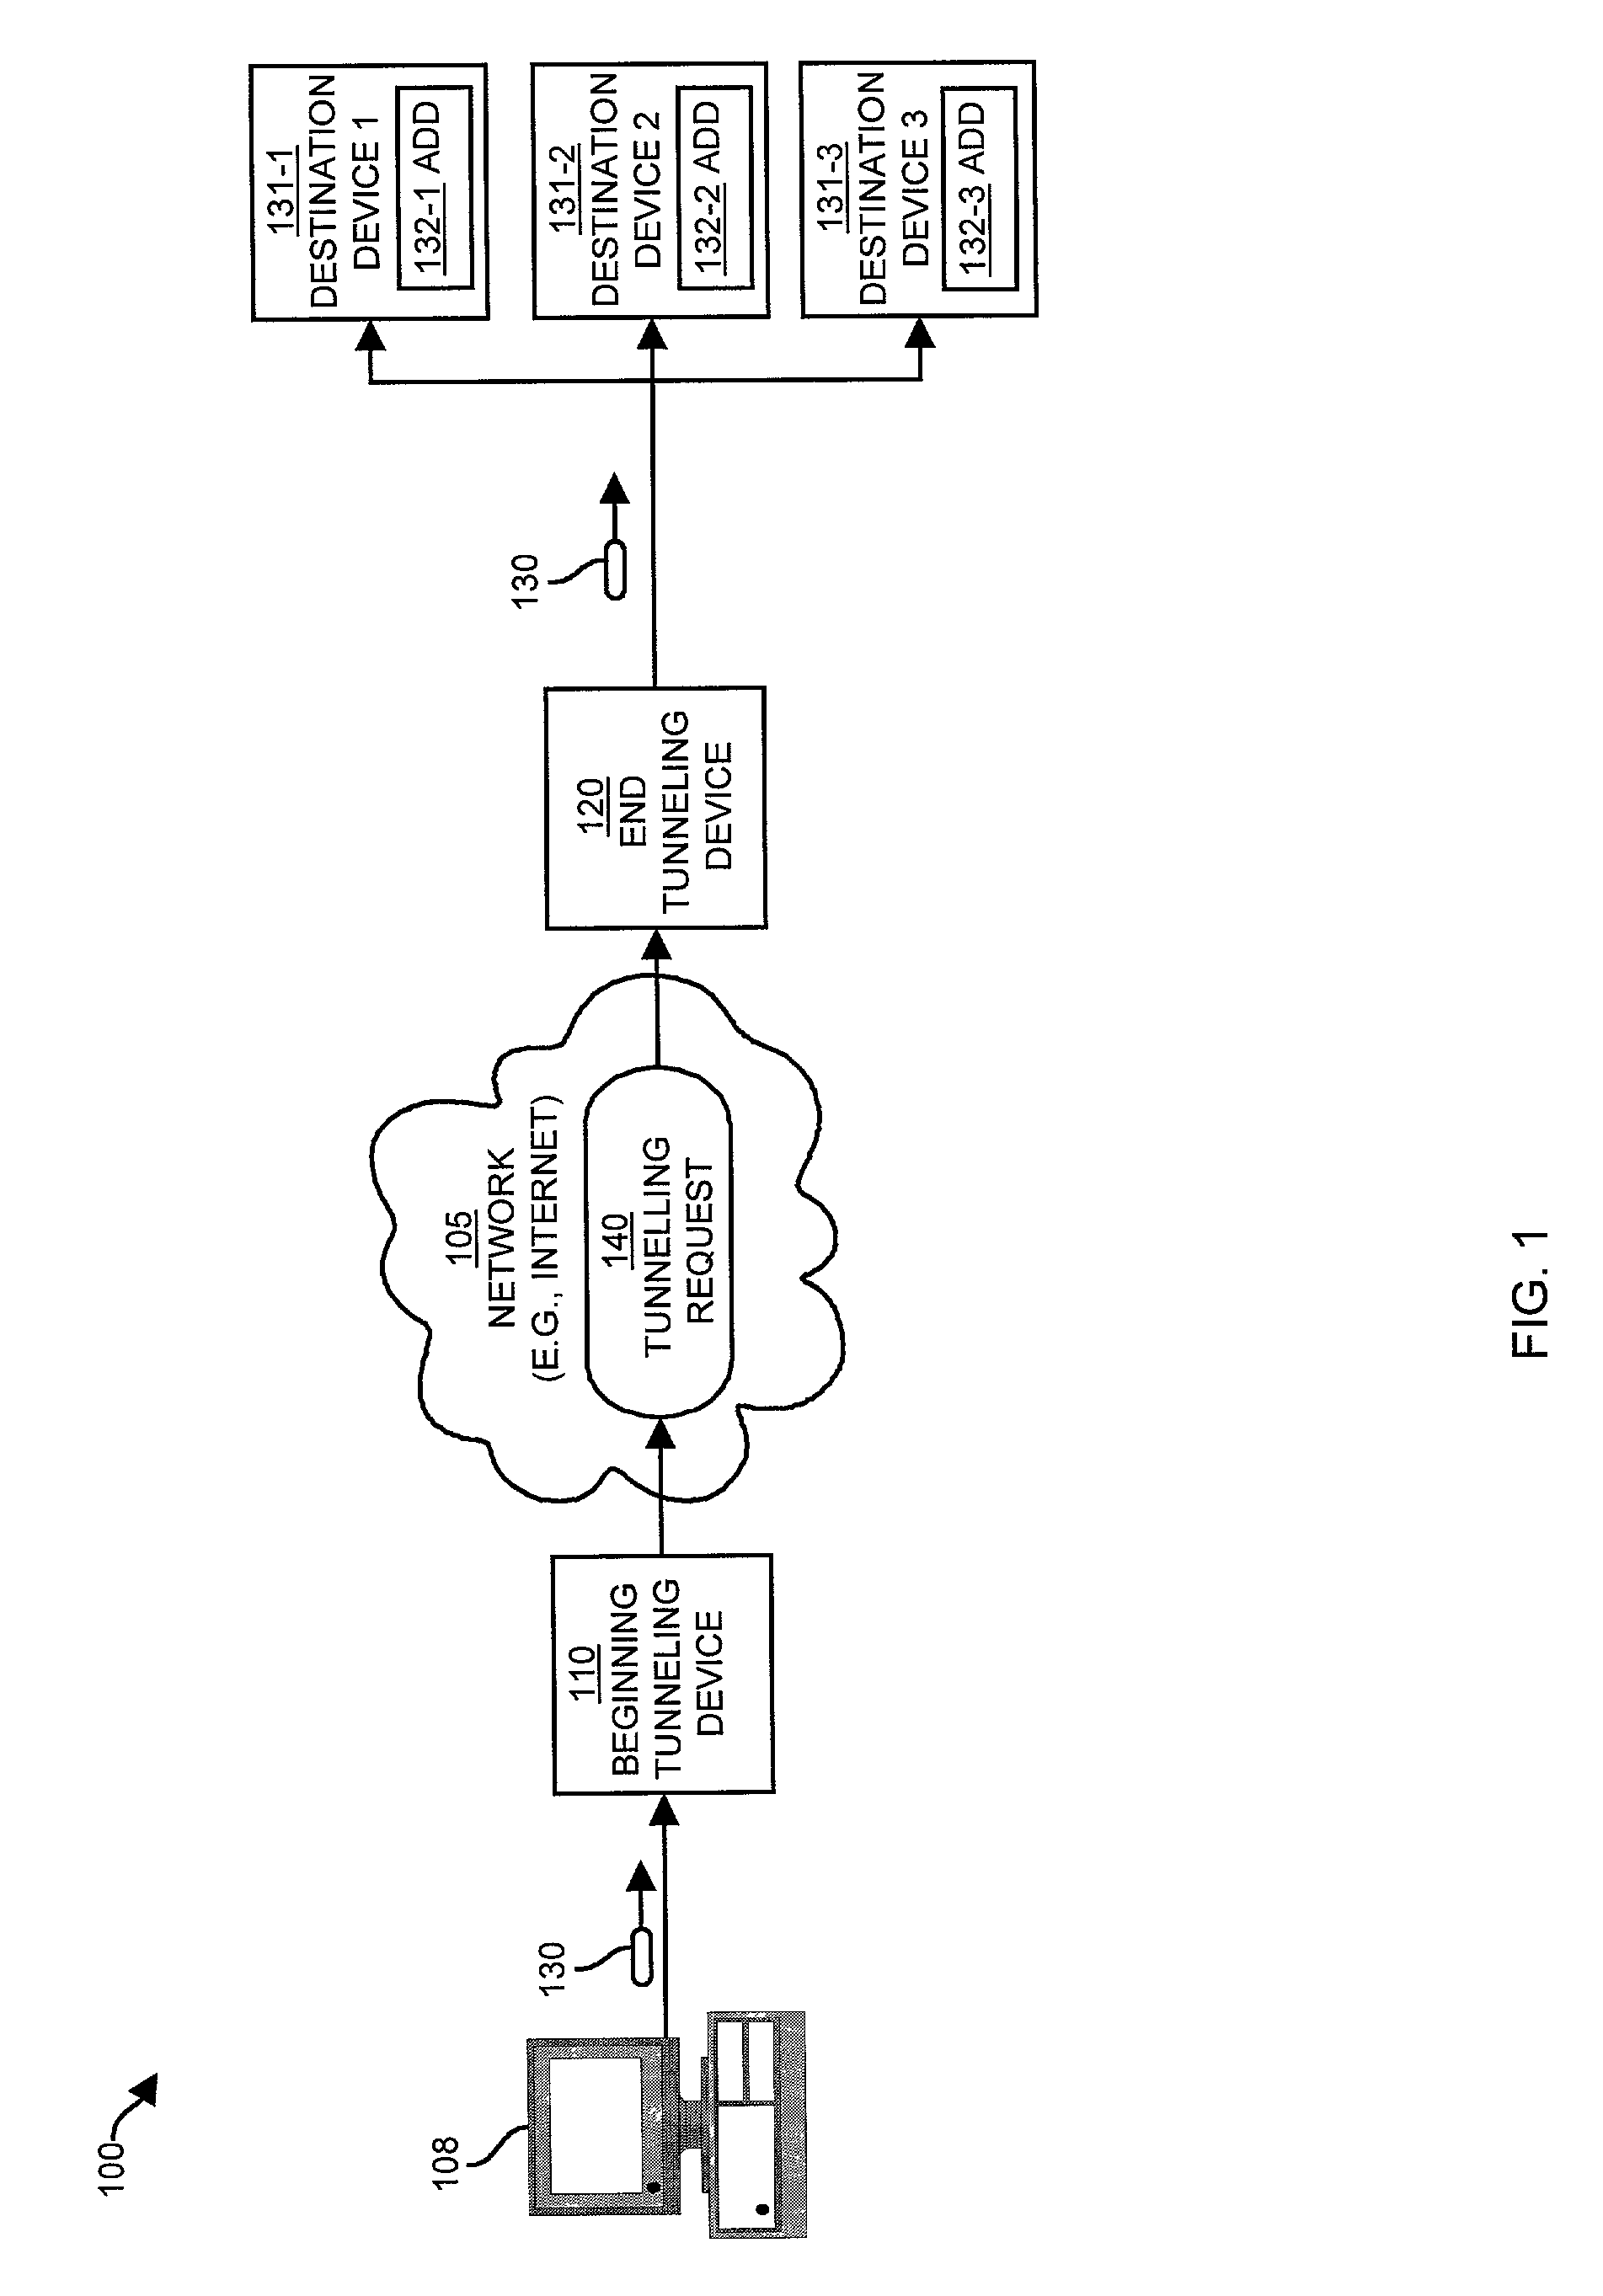 Method and apparatus for tunneling information